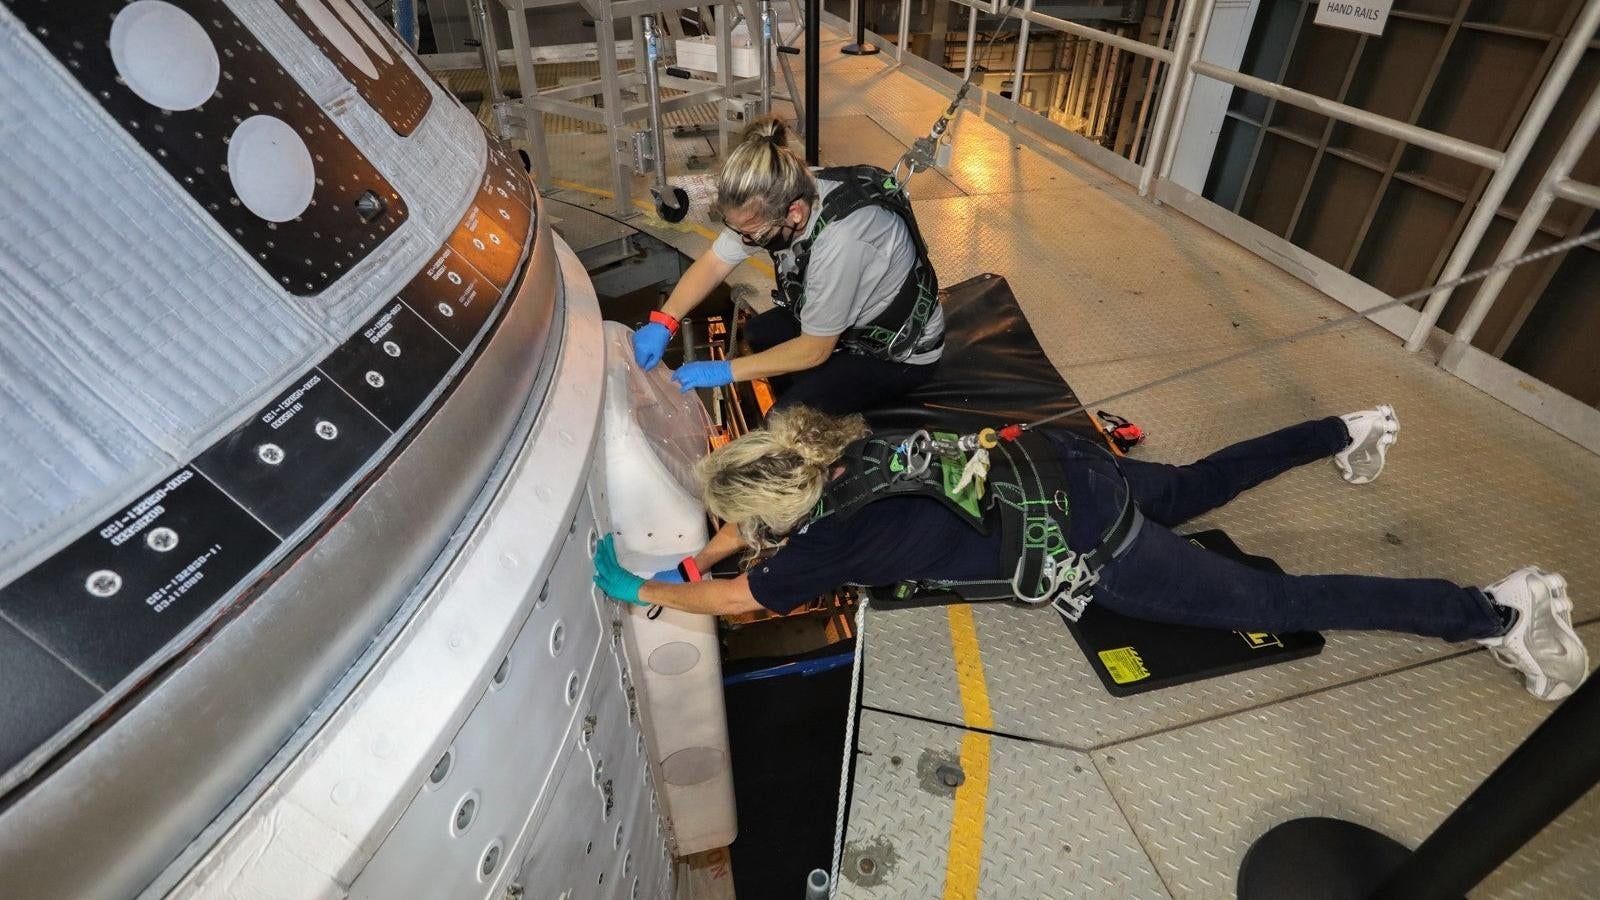 Boeing engineers attending to the faulty Starliner, parked inside the Vertical Integration Facility (VIF) at Space Launch Complex-41. (Photo: Boeing)